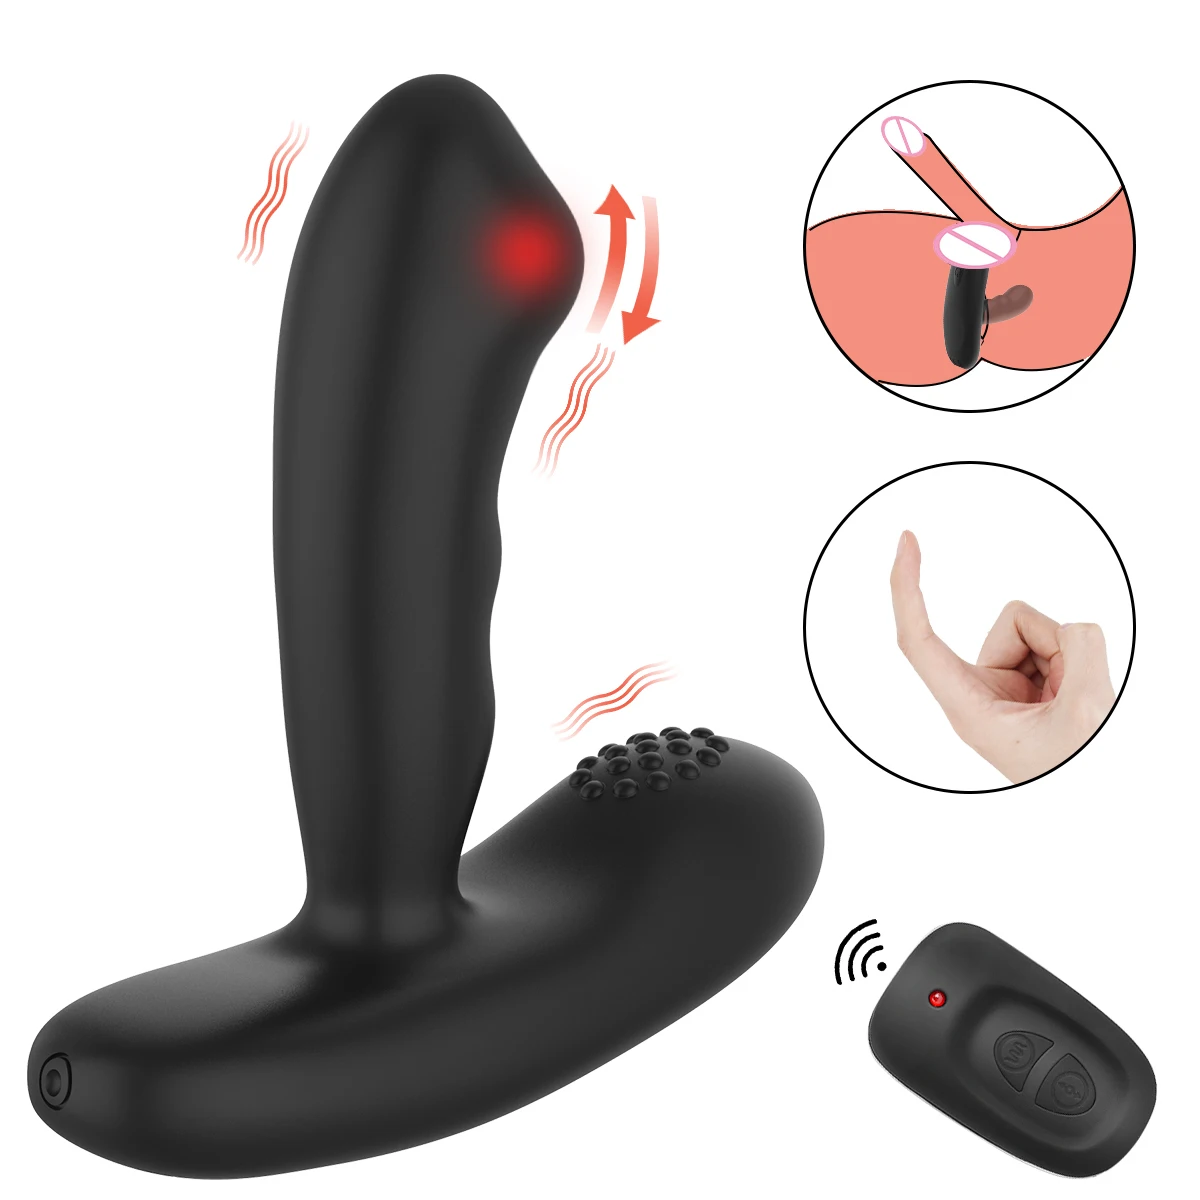 Waterproof USB Black Power Battery Rechargeable ABS Handheld Strong Speed Prostate Other Massager Products for Men